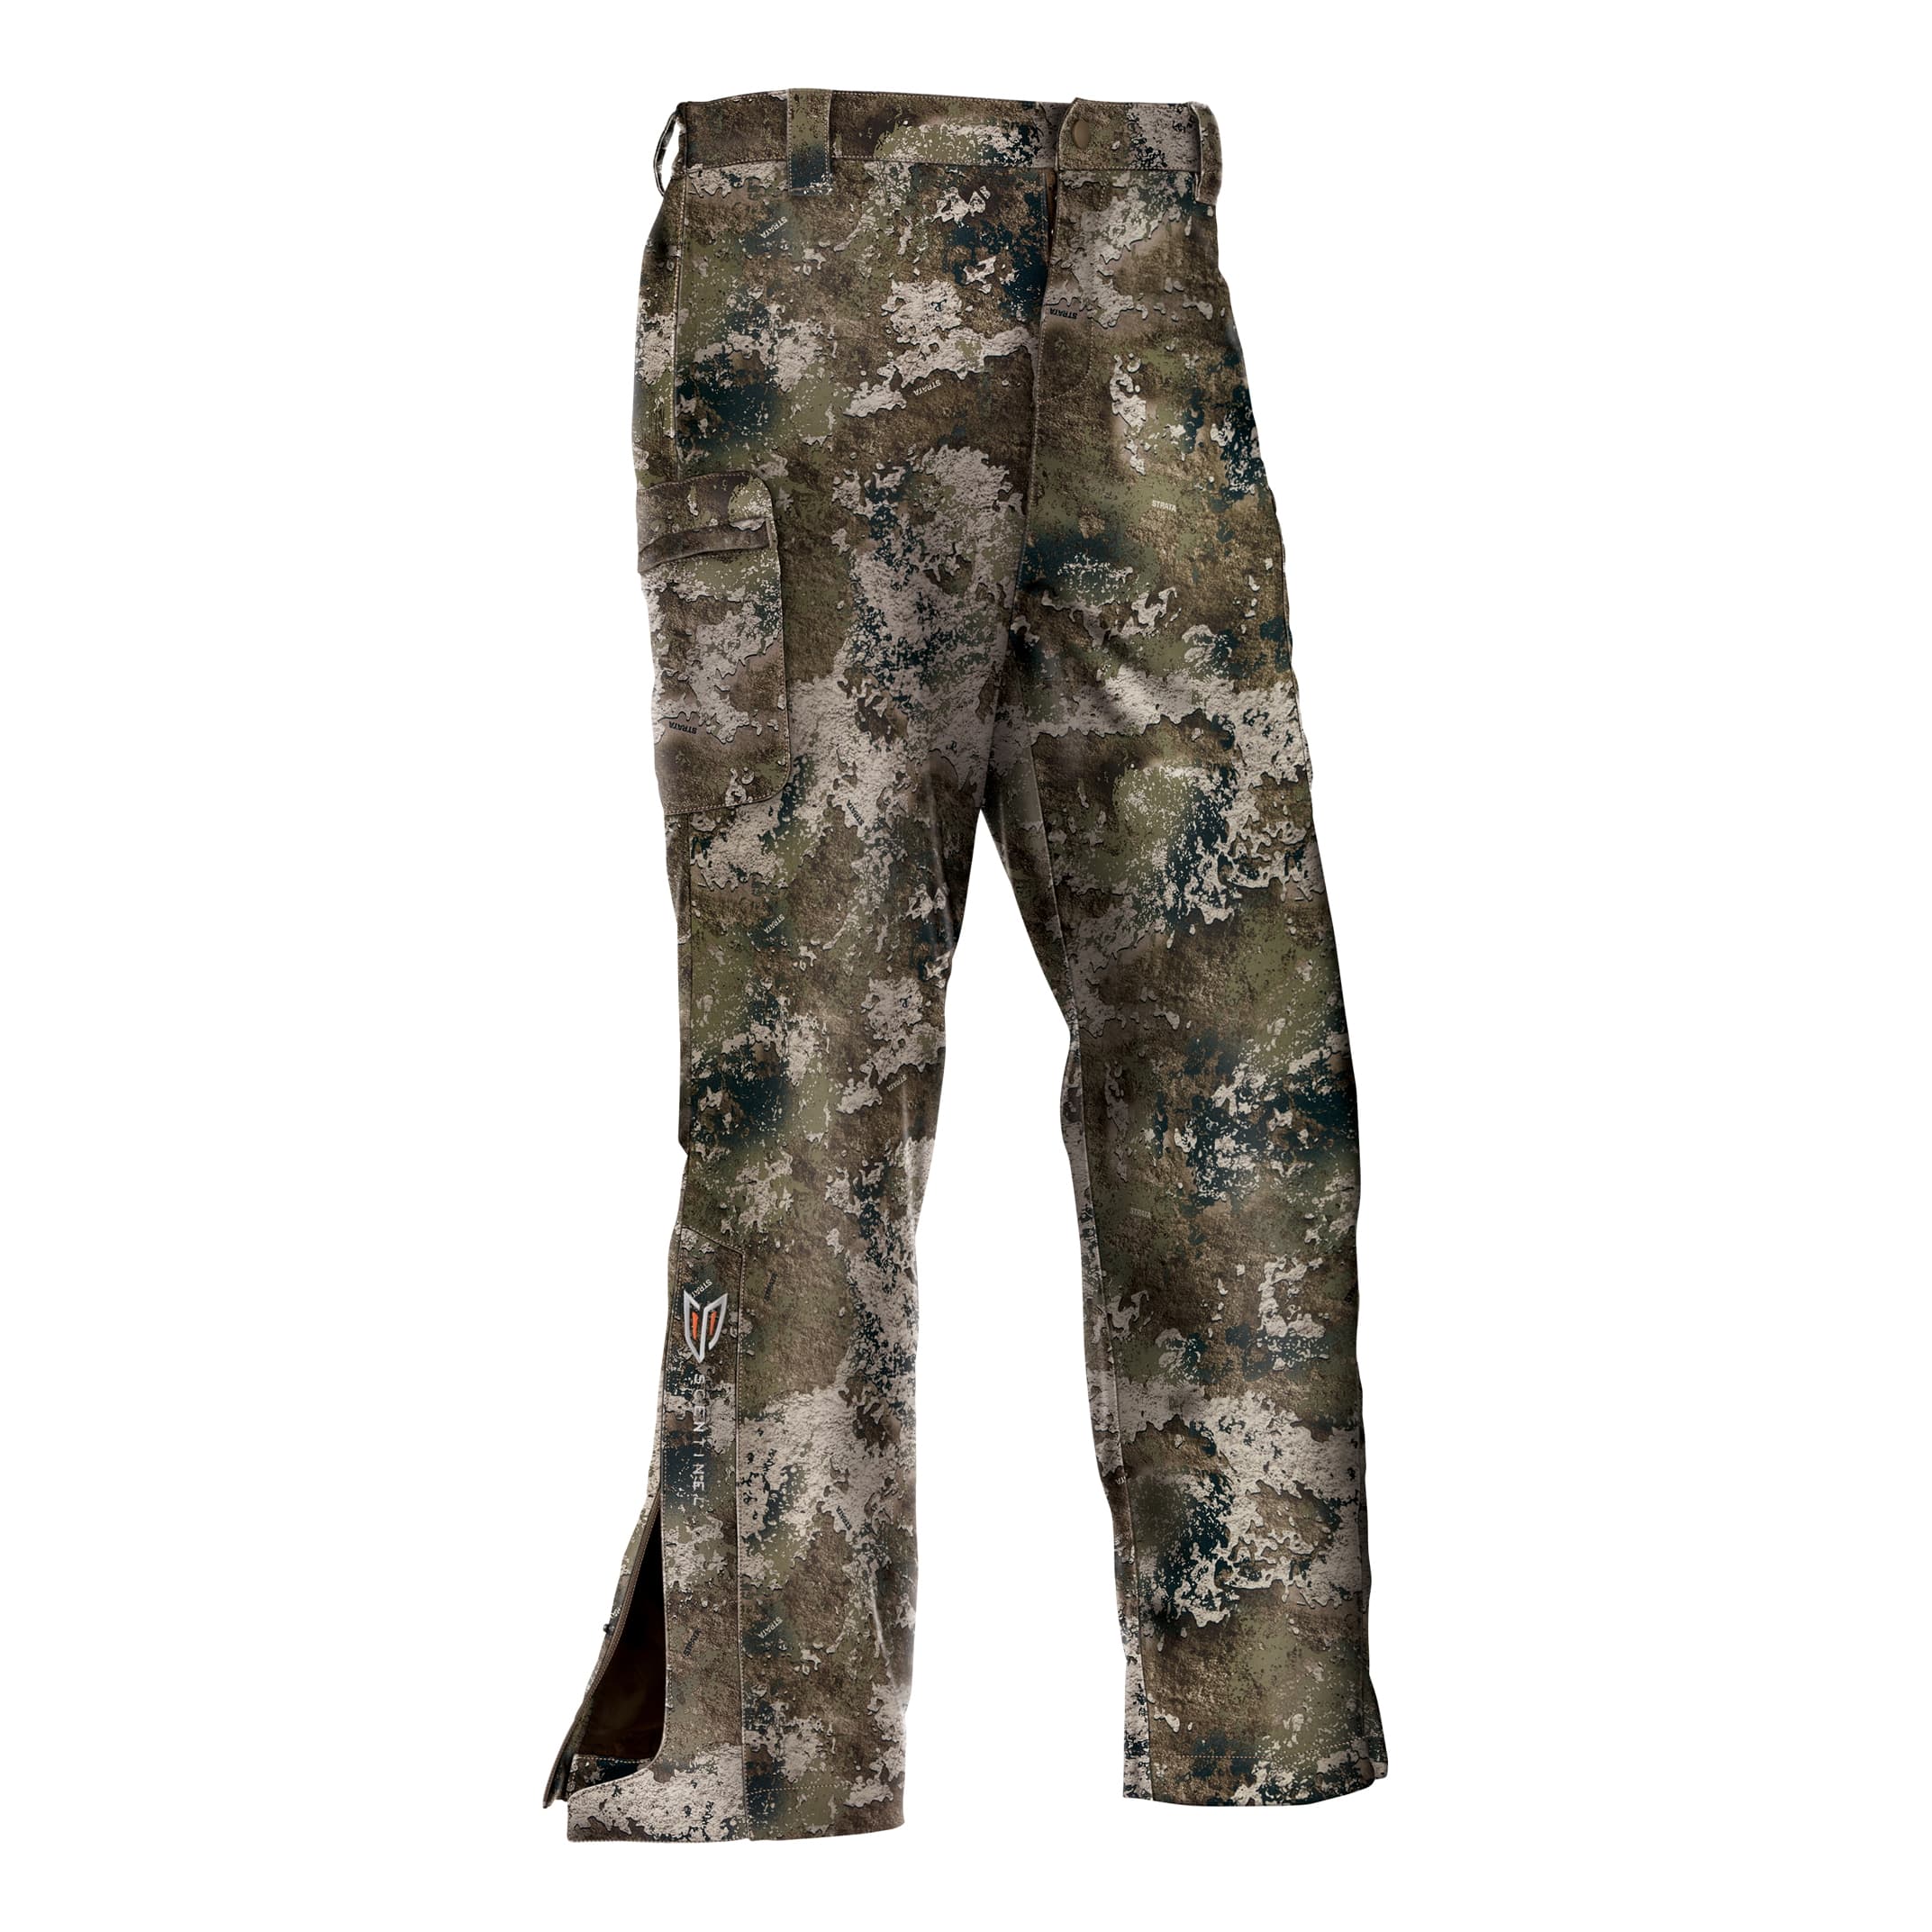 RedHead Thermal Fleece Pants for Youth